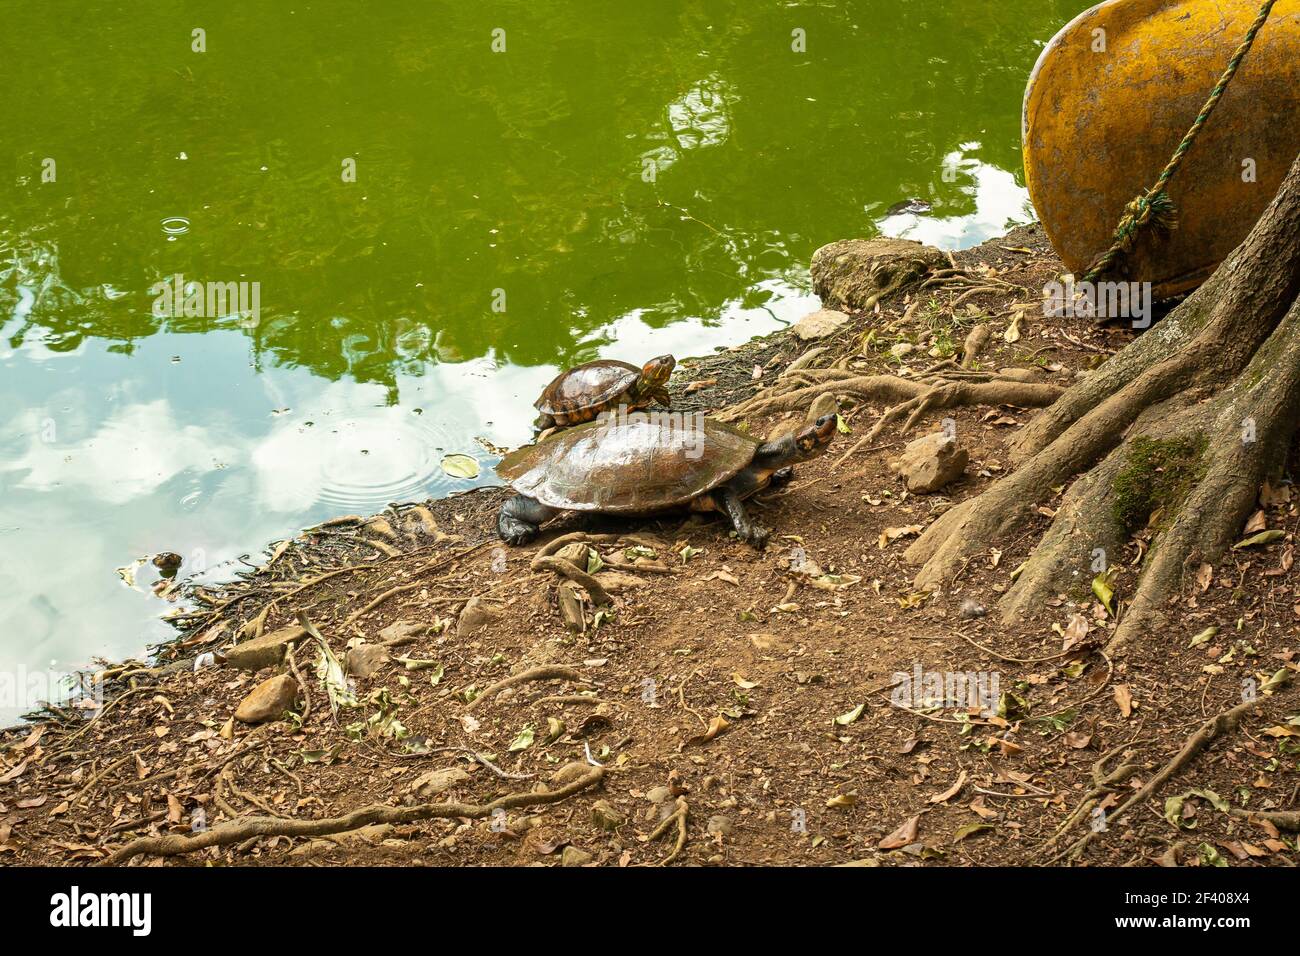 Two Red-Footed Tortoise (Chelonoidis Carbonarius) a Species from Northern South America Sunbathing Stock Photo